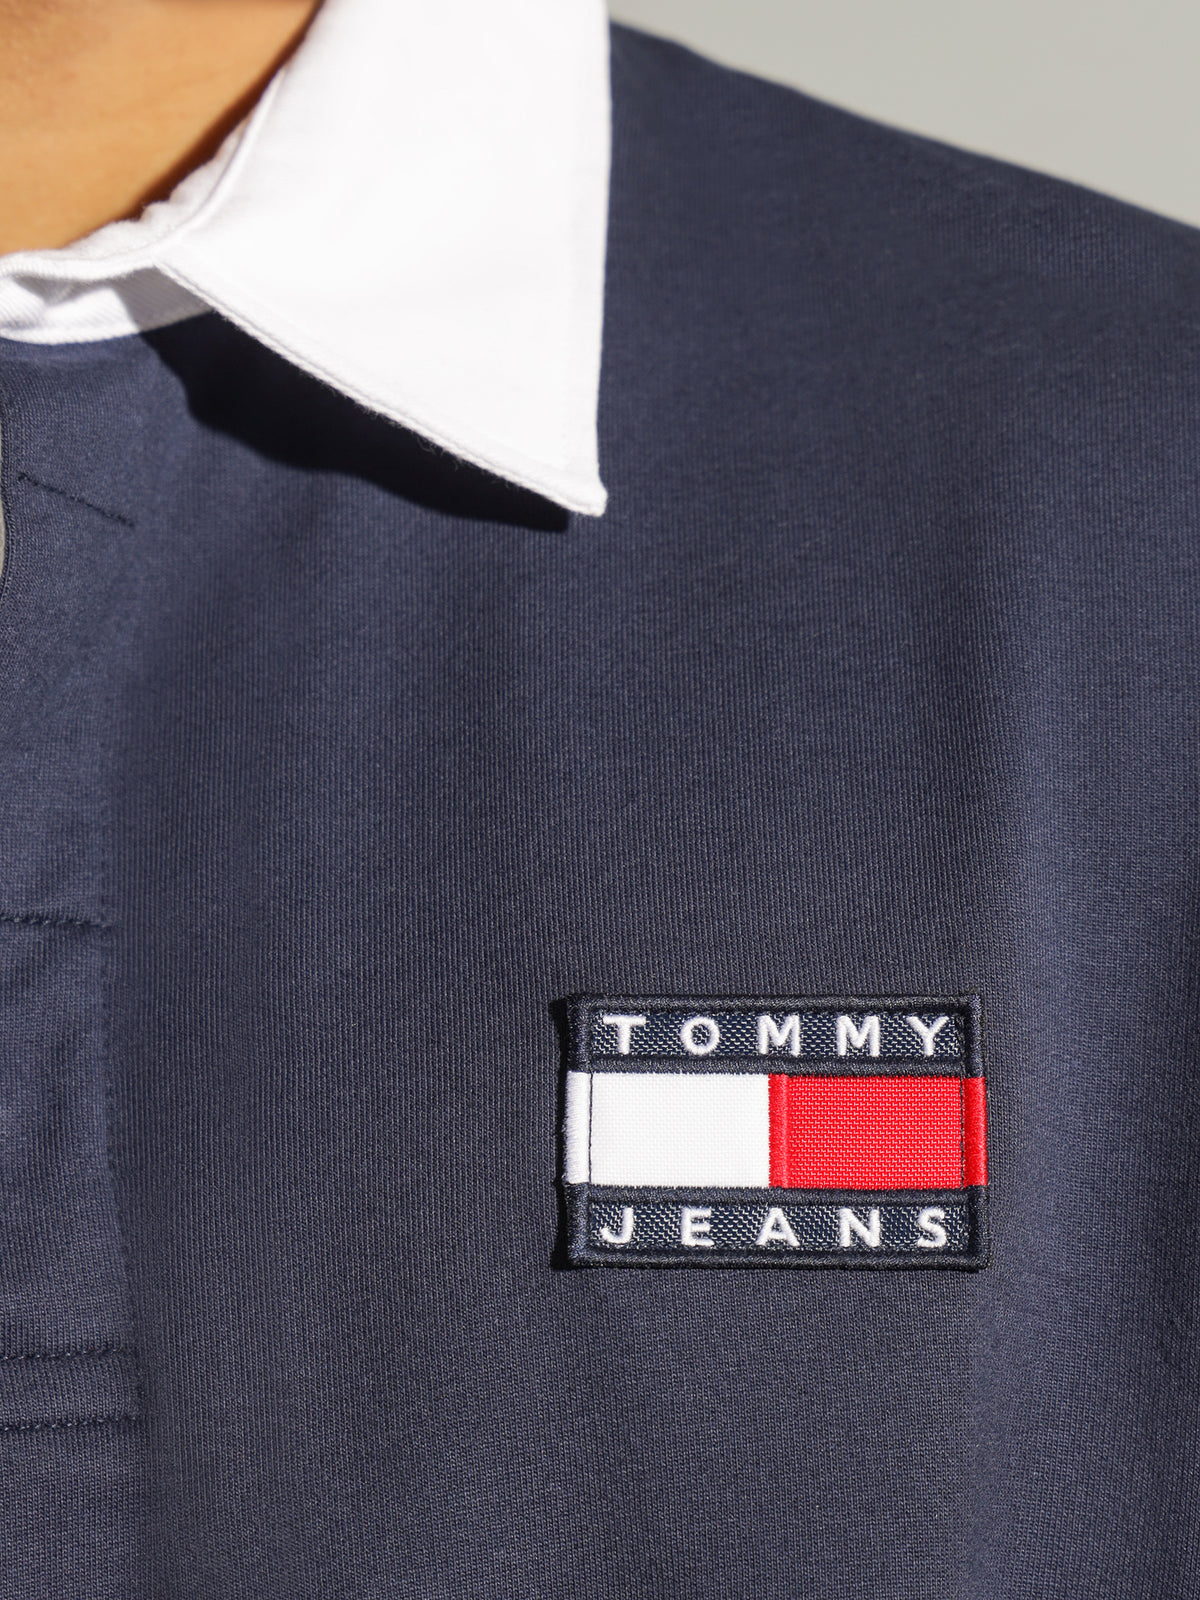 Rugby Polo Shirt in Twilight Navy